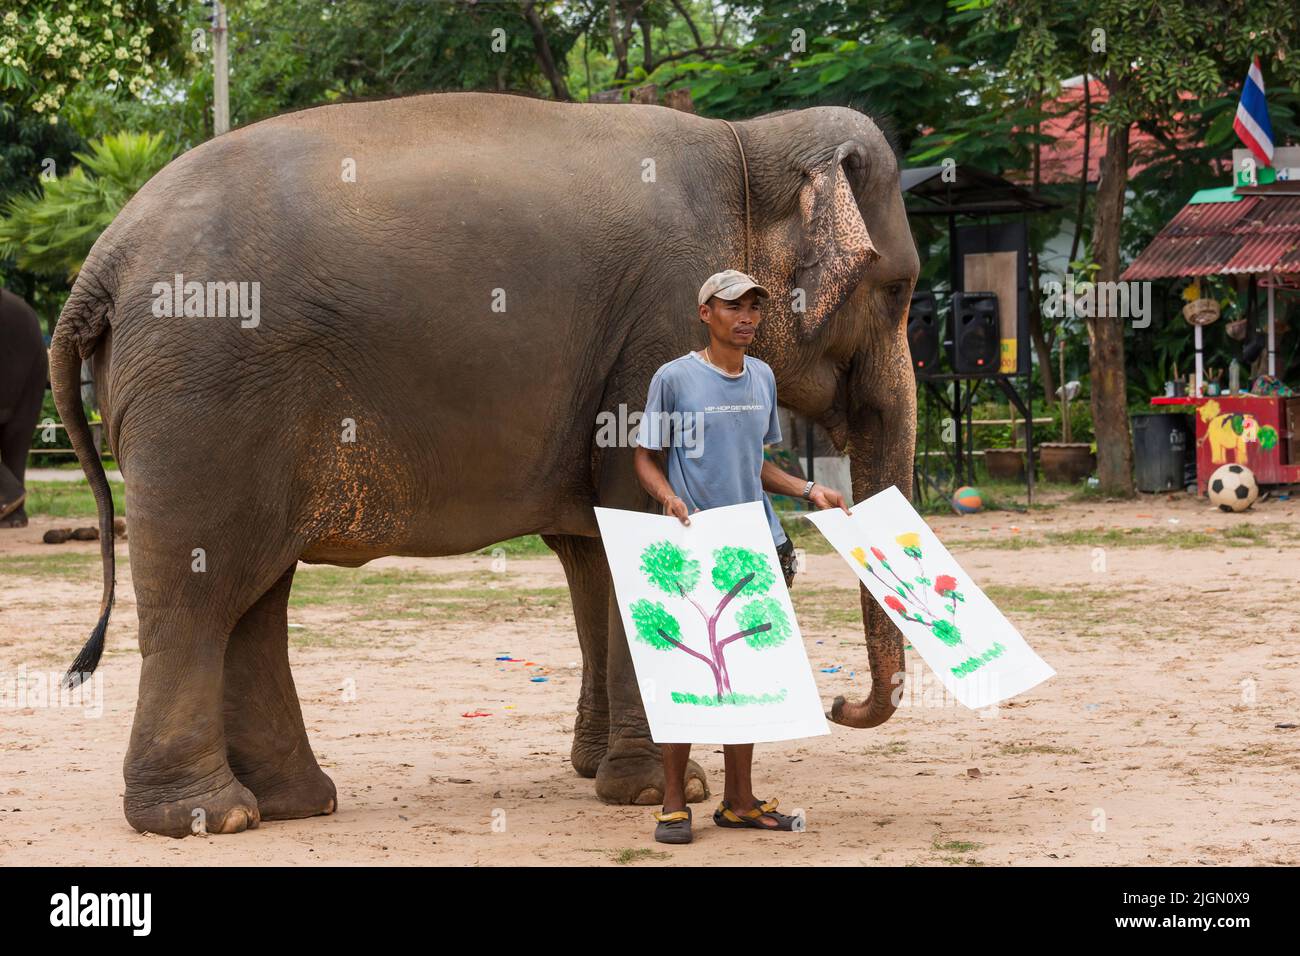 Elephant village, elephant show, painting, performance, Surin, Isan(Isaan),Thailand, Southeast Asia, Asia Stock Photo